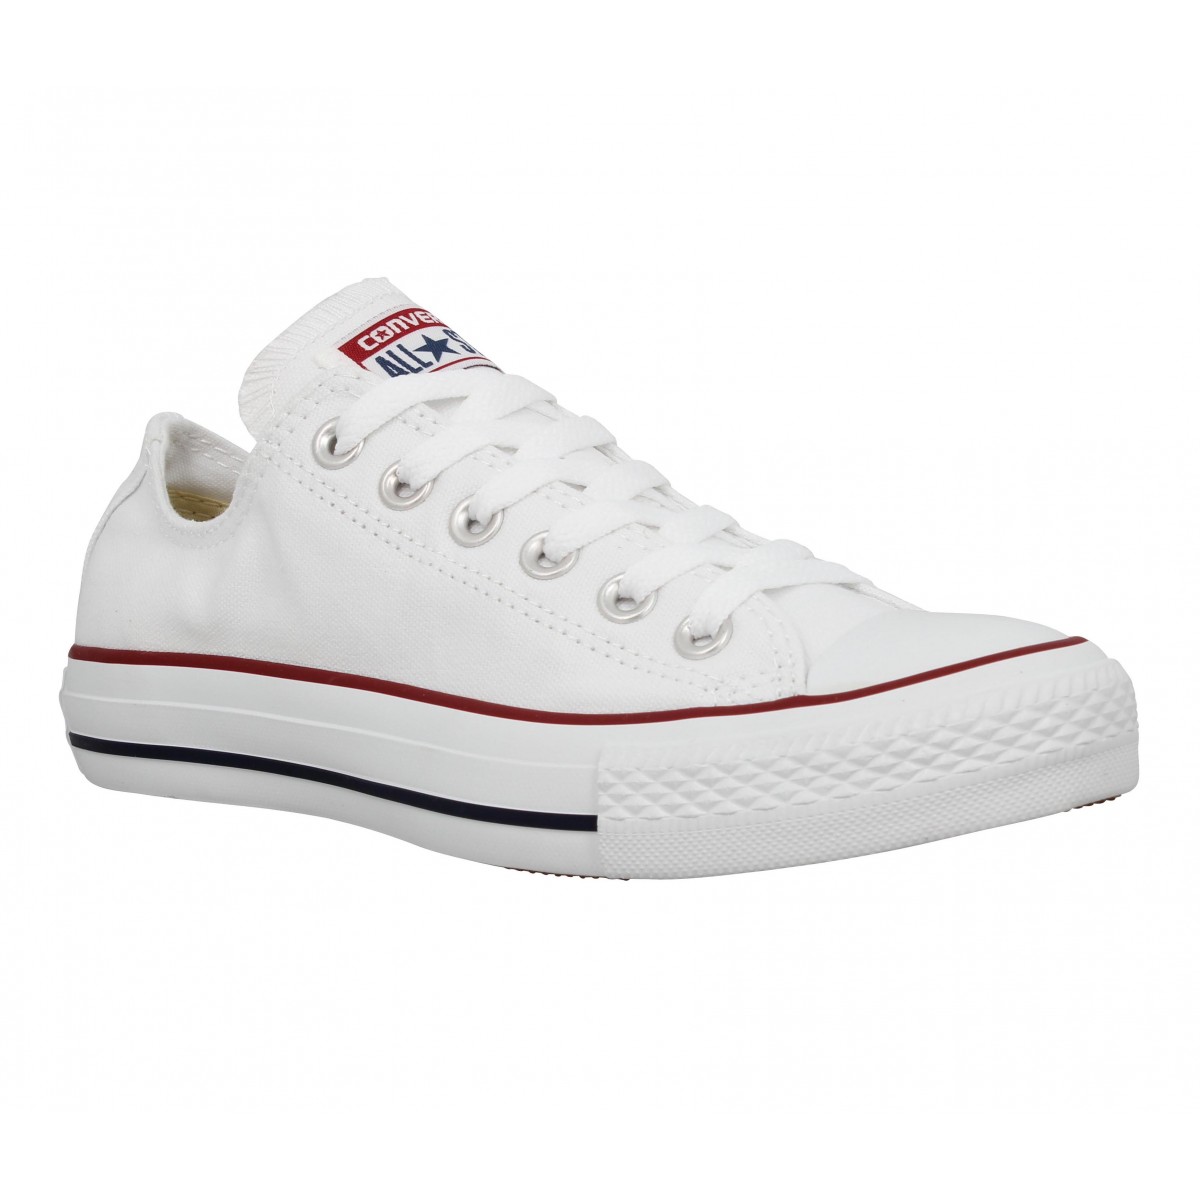 converse all star homme blanche